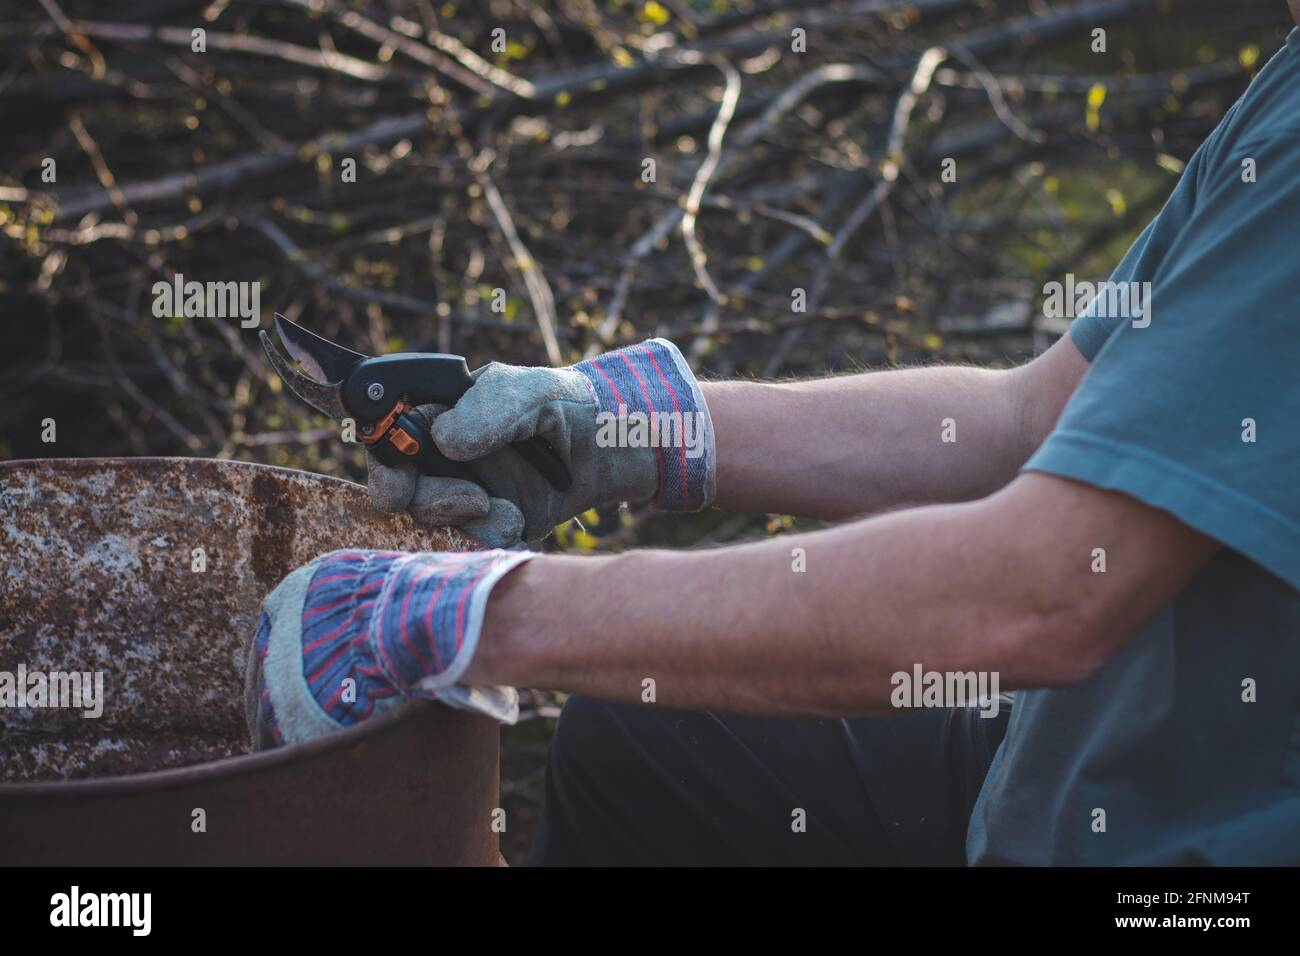 Detail of the deployment of a young temporary worker in a forest environment while cutting branches. Sharp scissors cut through a small tree stem like Stock Photo